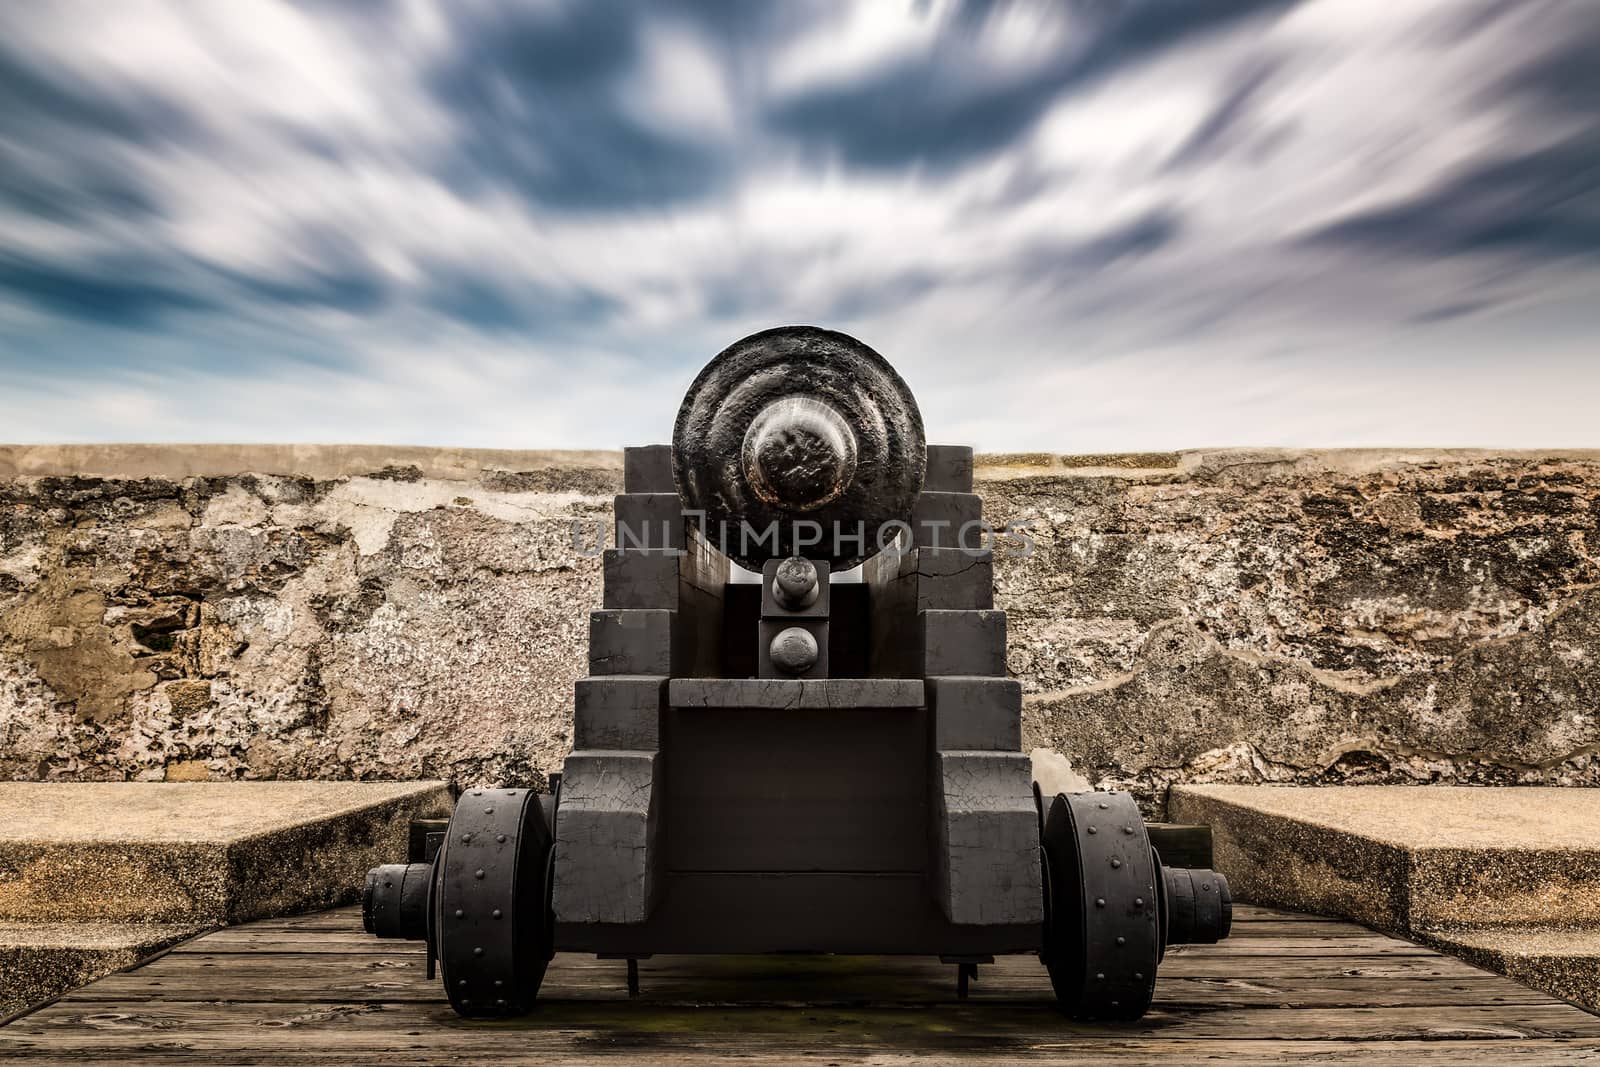 An antique cannon seen from behind under blurred skies.